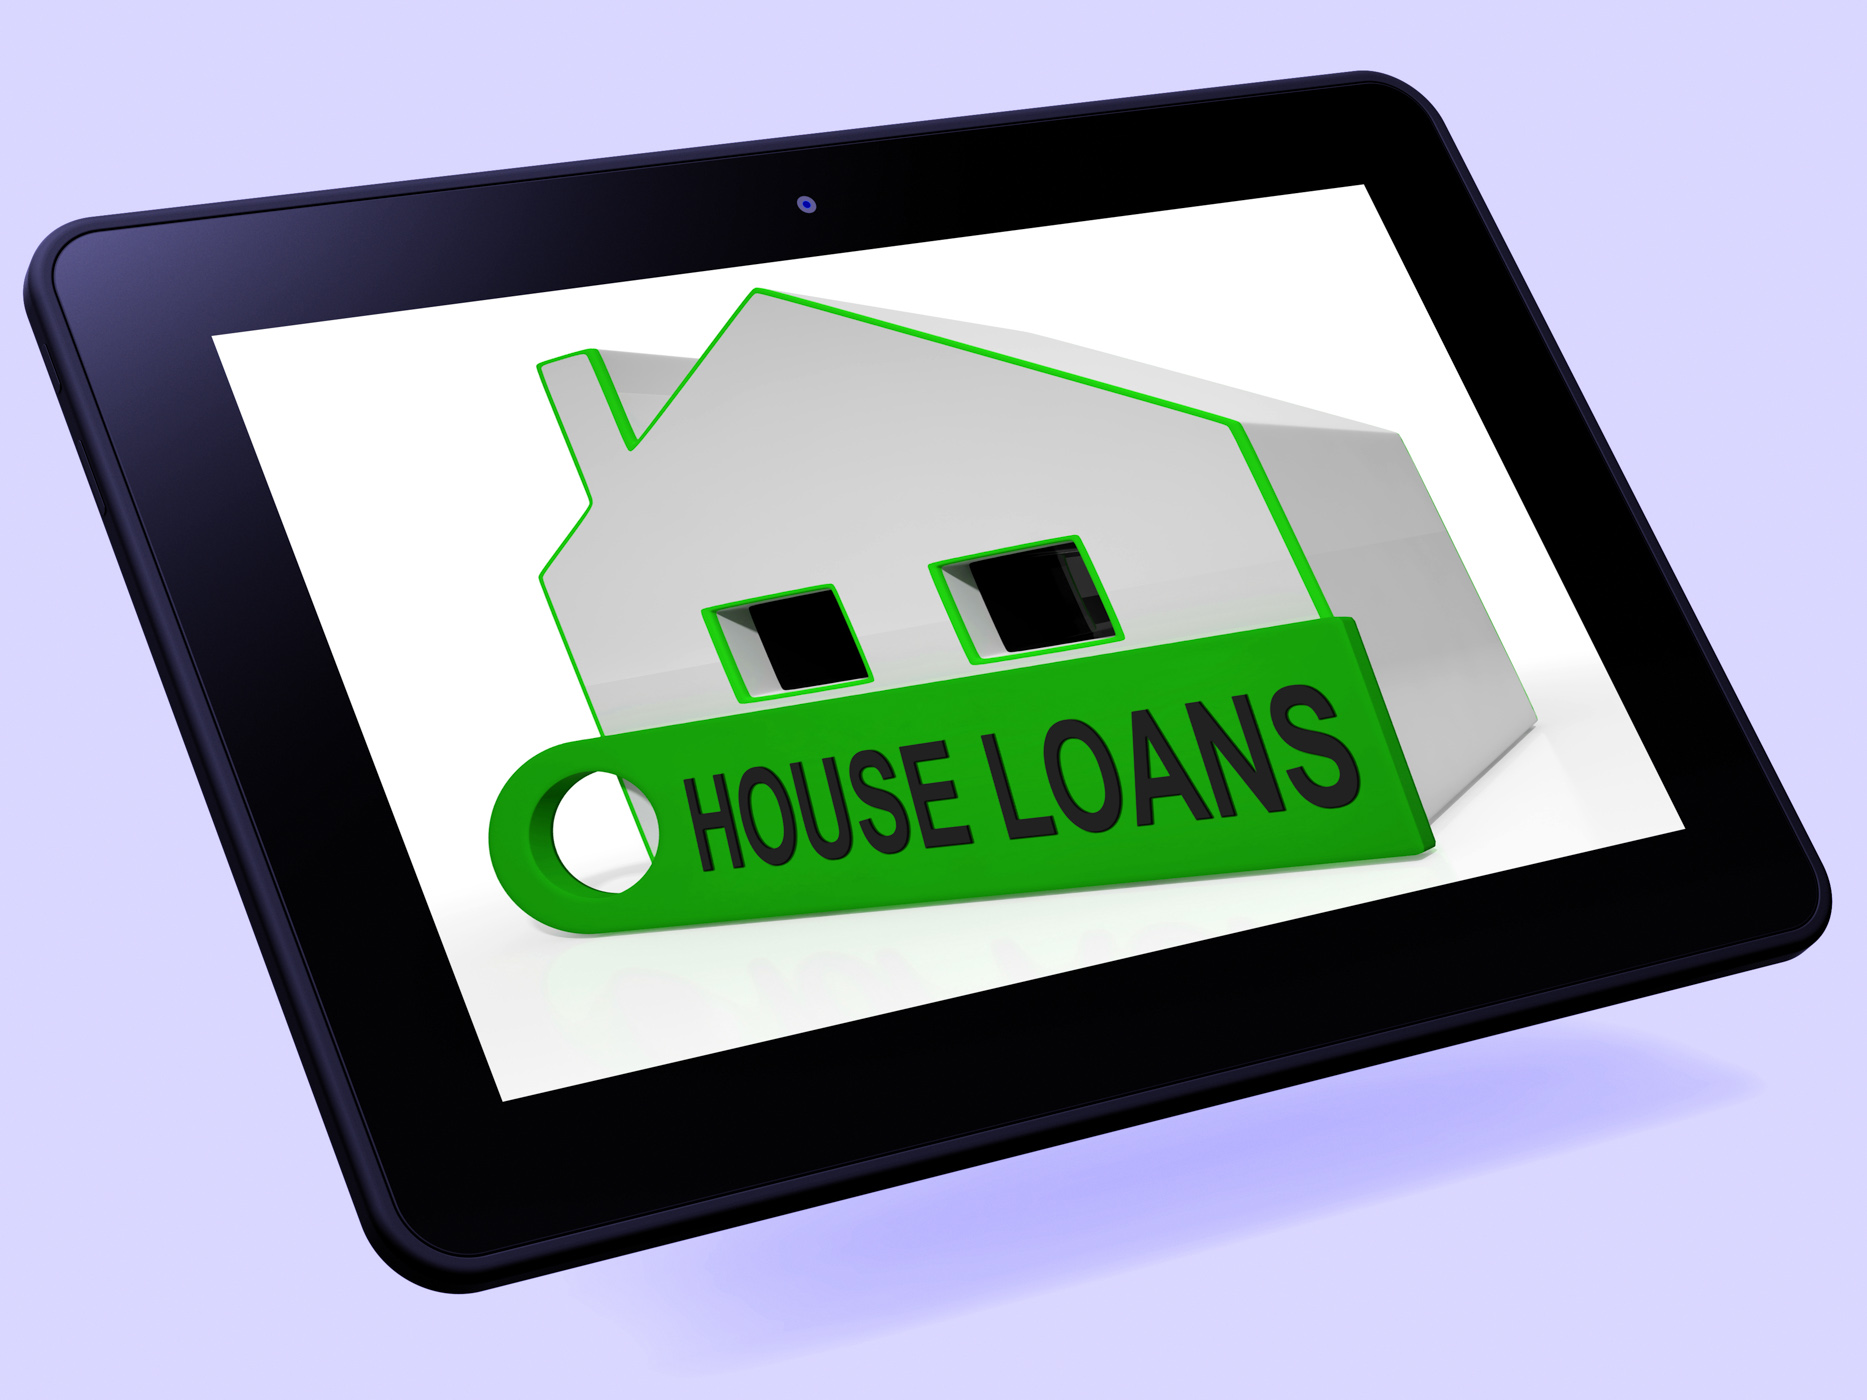 House loans home tablet means mortgage interest and repay photo